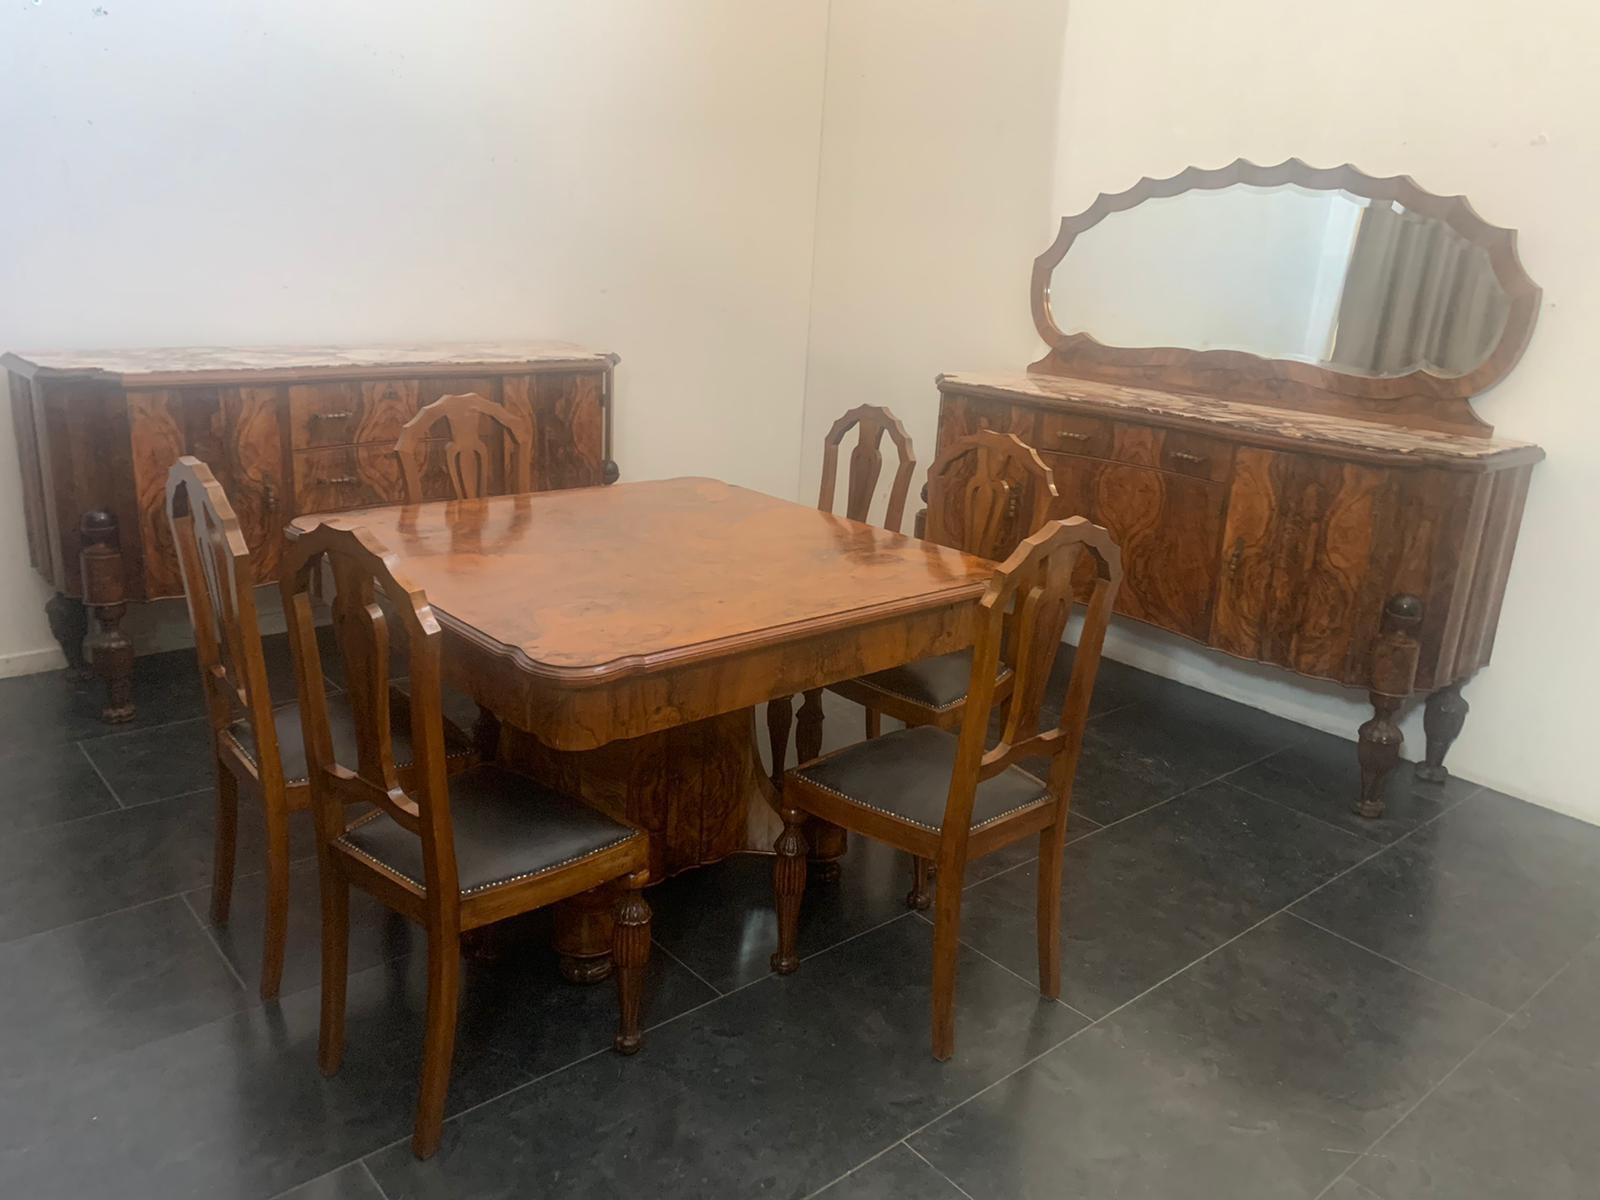 High cabinetry dining room set, consisting of: 2 sideboards, a mirror, table and 6 chairs. 
The sideboards are moved, with finely carved feet in an elongated pine cone with an upper ebonized sphere, inserted in a niche. l tops in Breccia Medicea